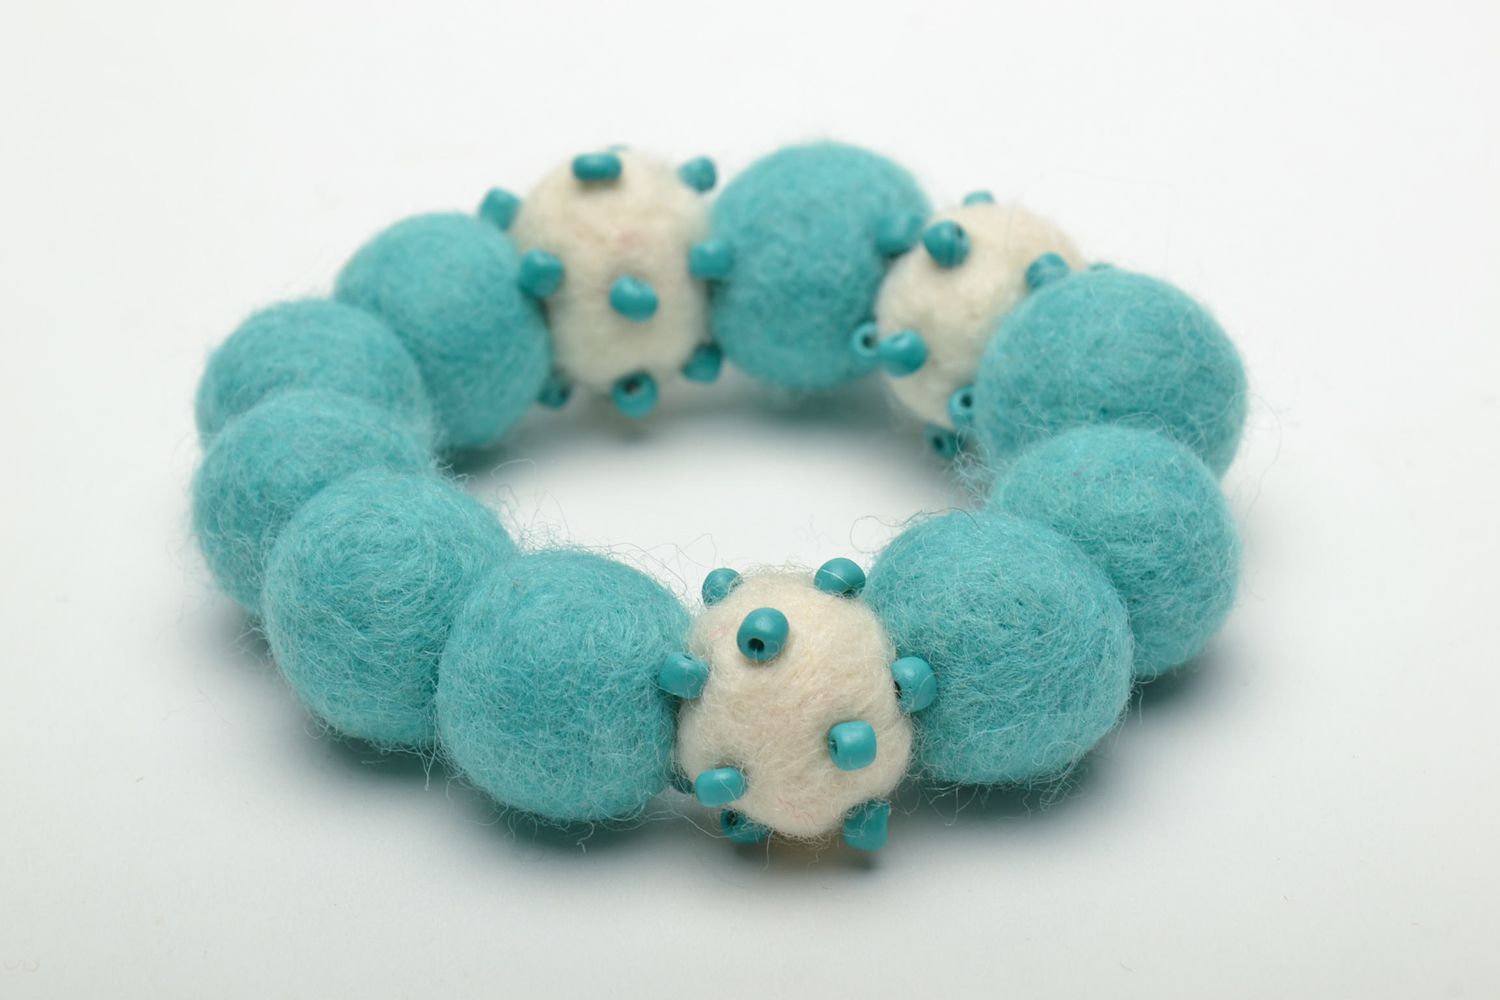 Felted wool bracelet of turquoise color with beads photo 4